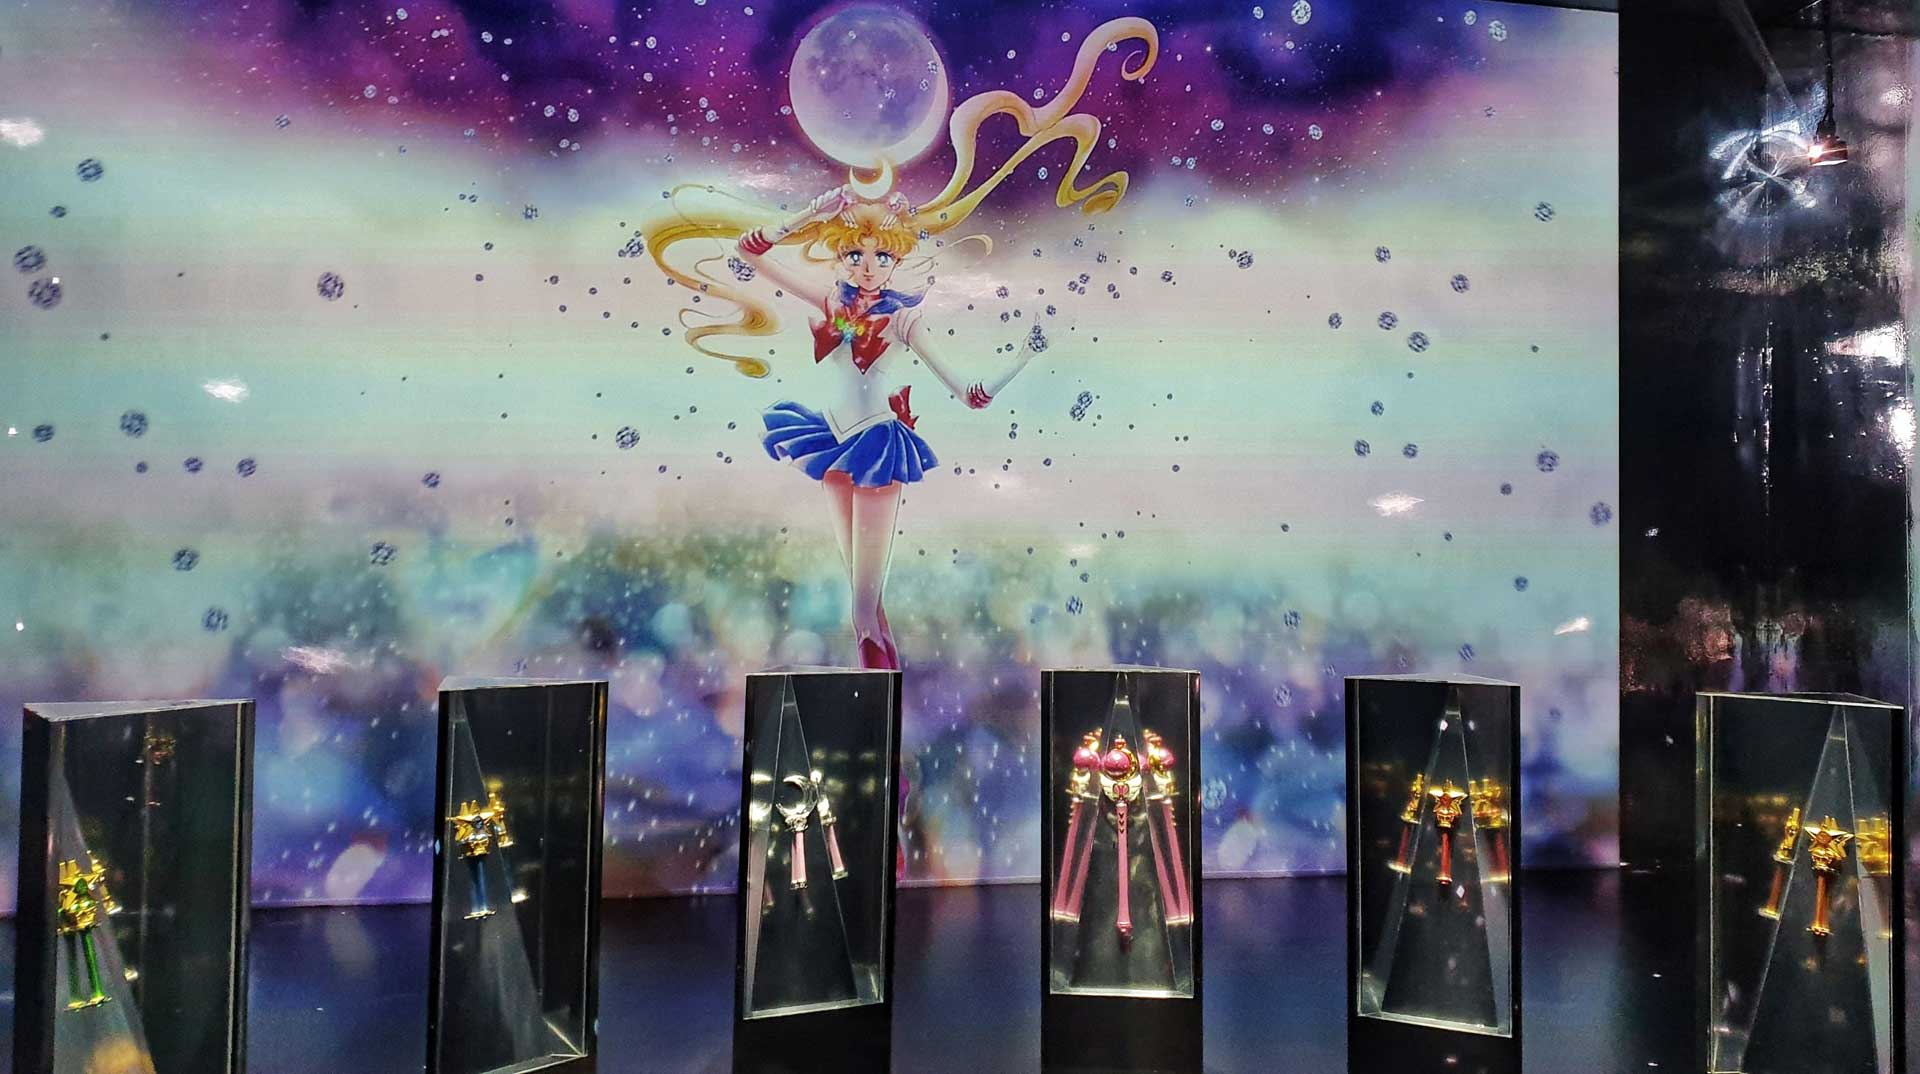 Sailor Moon Museum: Celebrate the 30th Anniversary of One of Japan’s Most Popular Manga Series